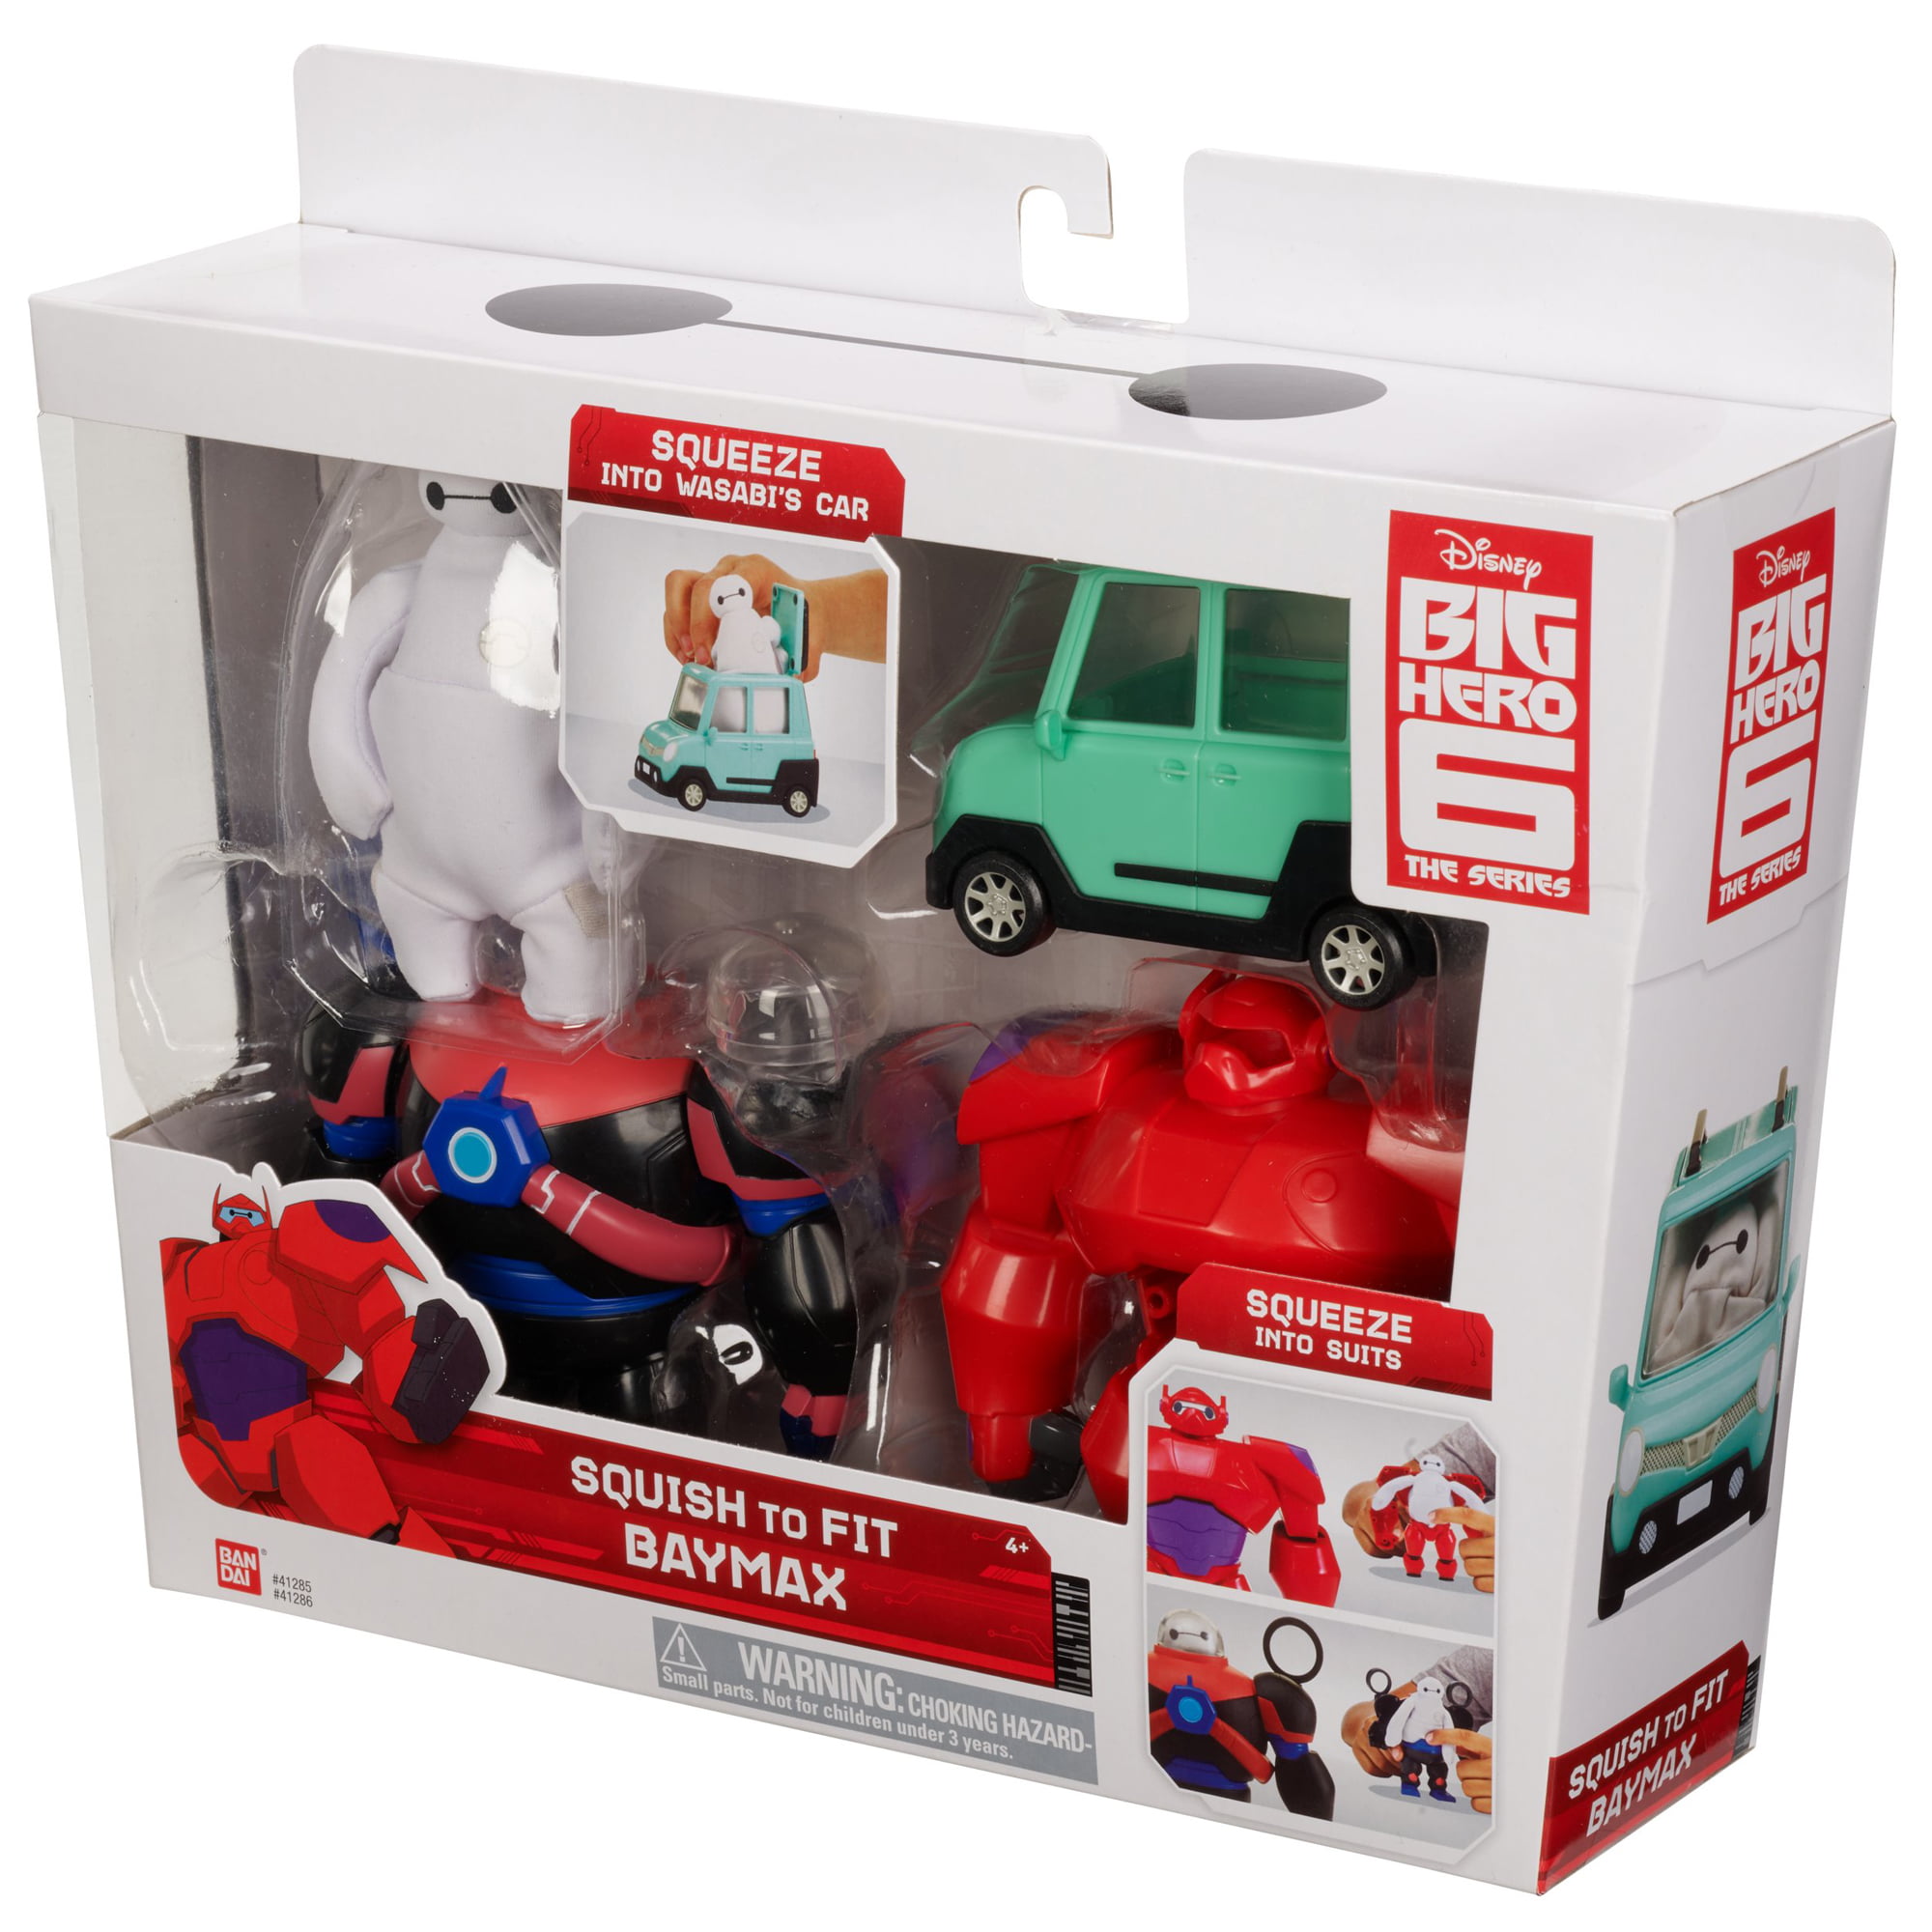 BIG HERO 6 The Series SQUISH-TO-FIT BAYMAX Toy Figure with Accessories 